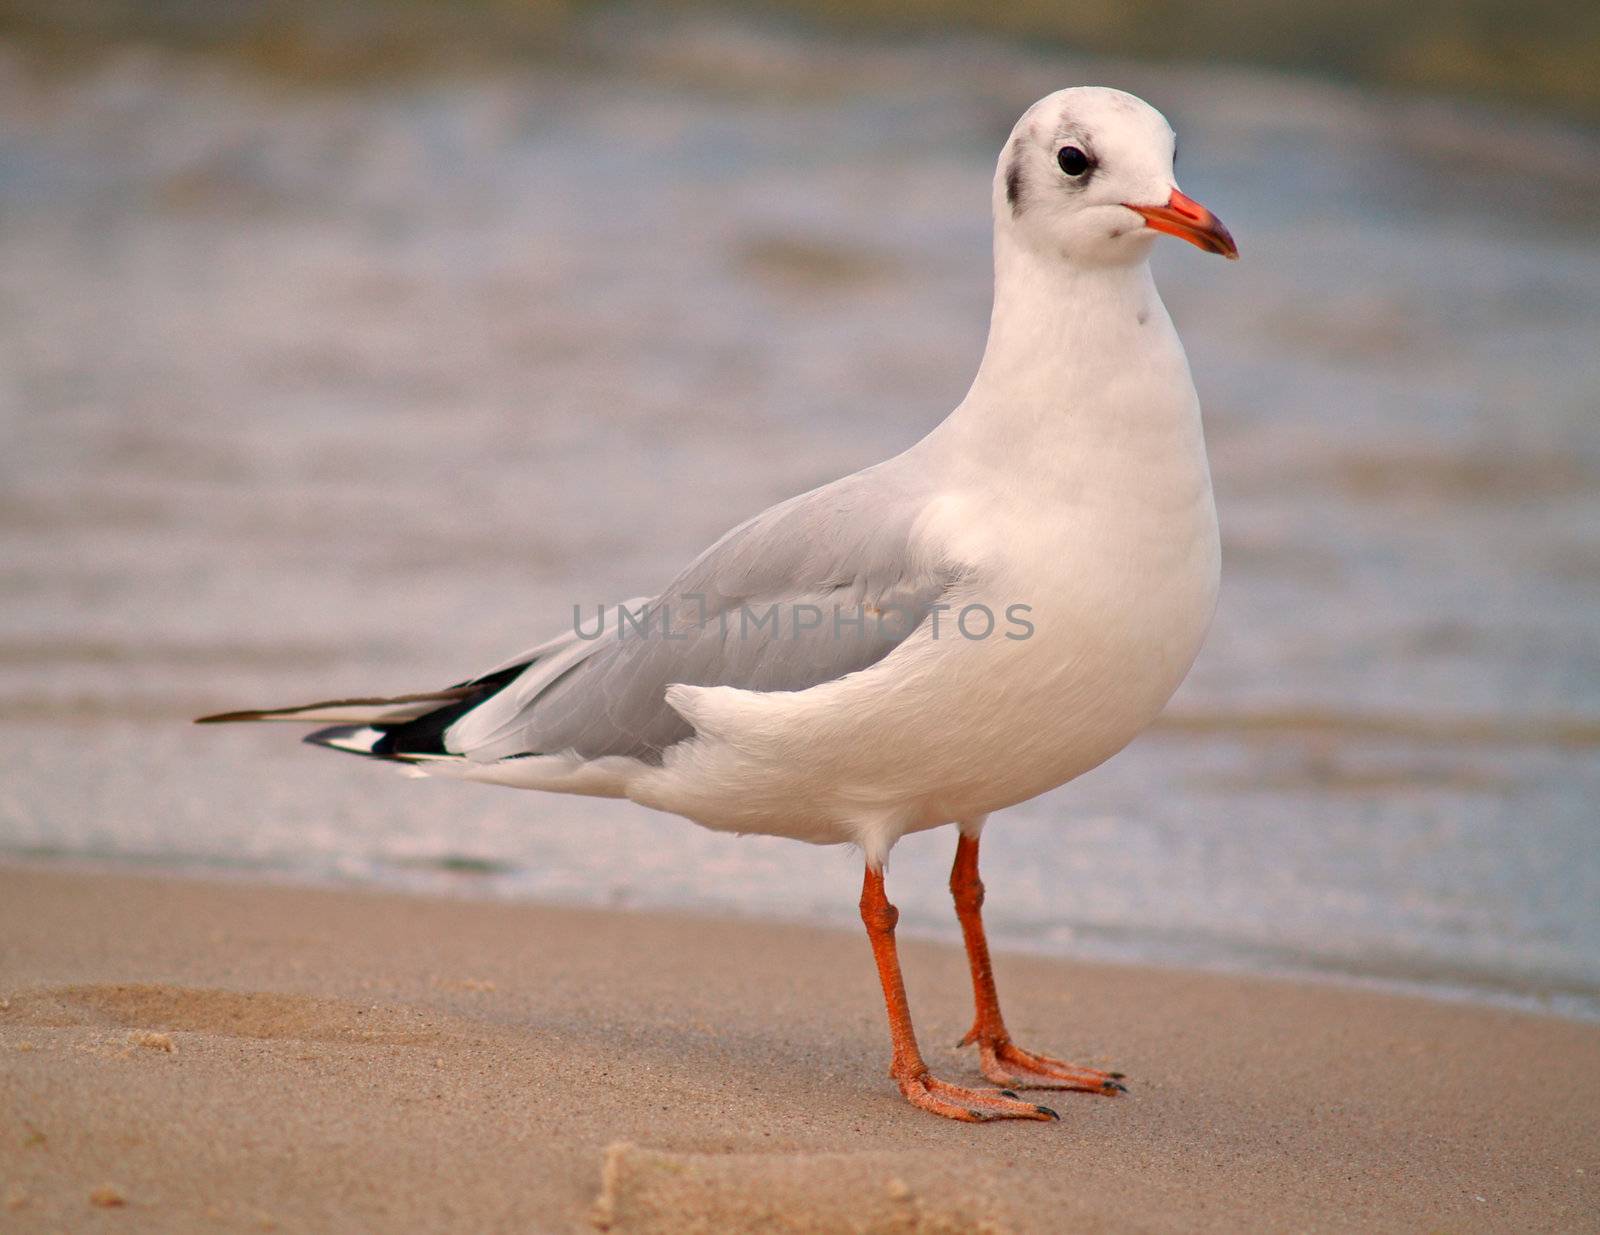 Seagull at the beach of the island Usedom, Germany
